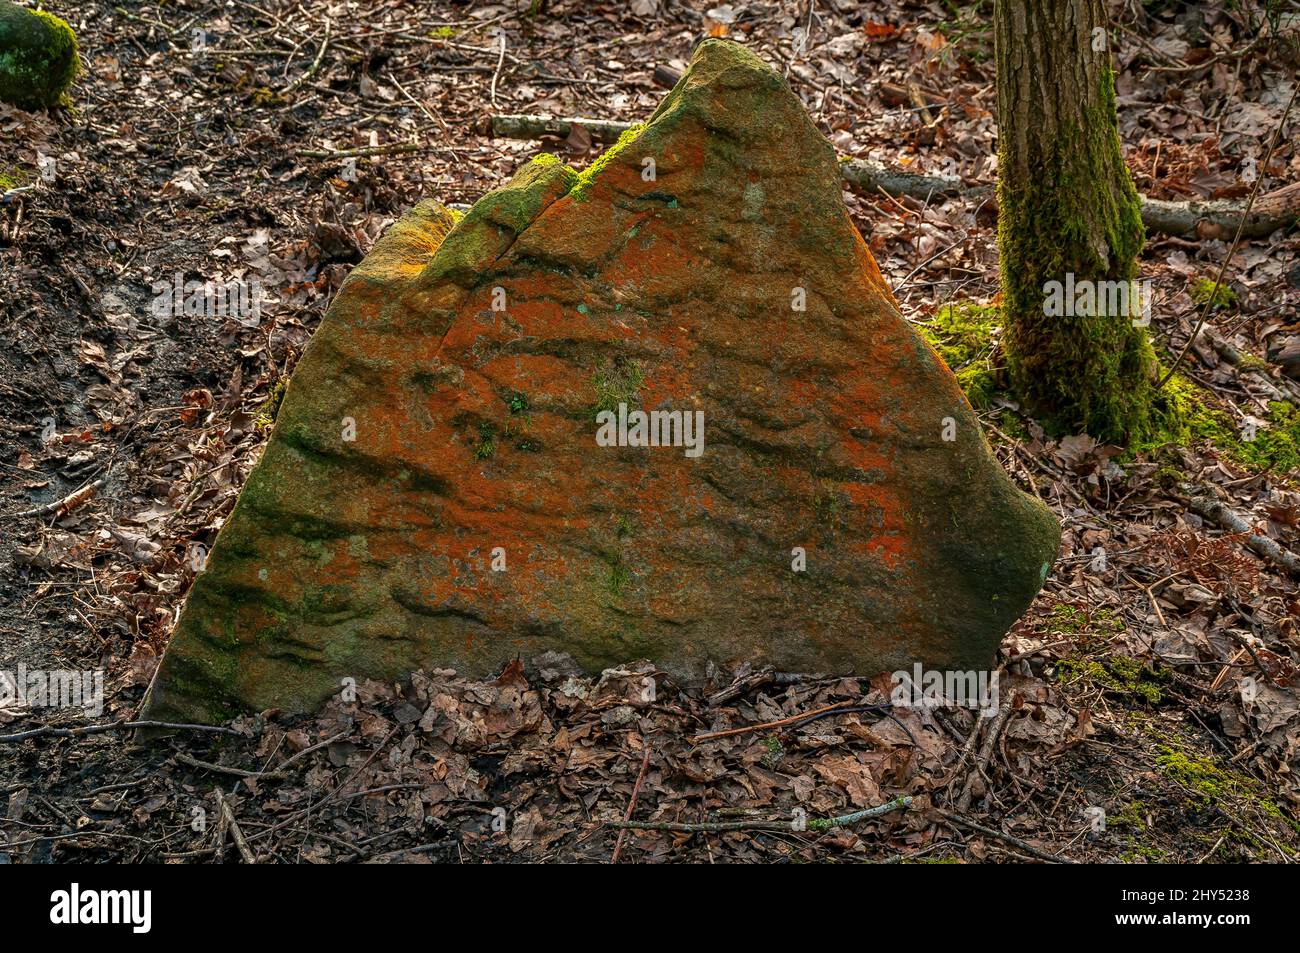 Triangular gritstone boulder showing fluvial deposition ripple-marks, and bright orange lichen and bright green moss growing all over it. Stock Photo